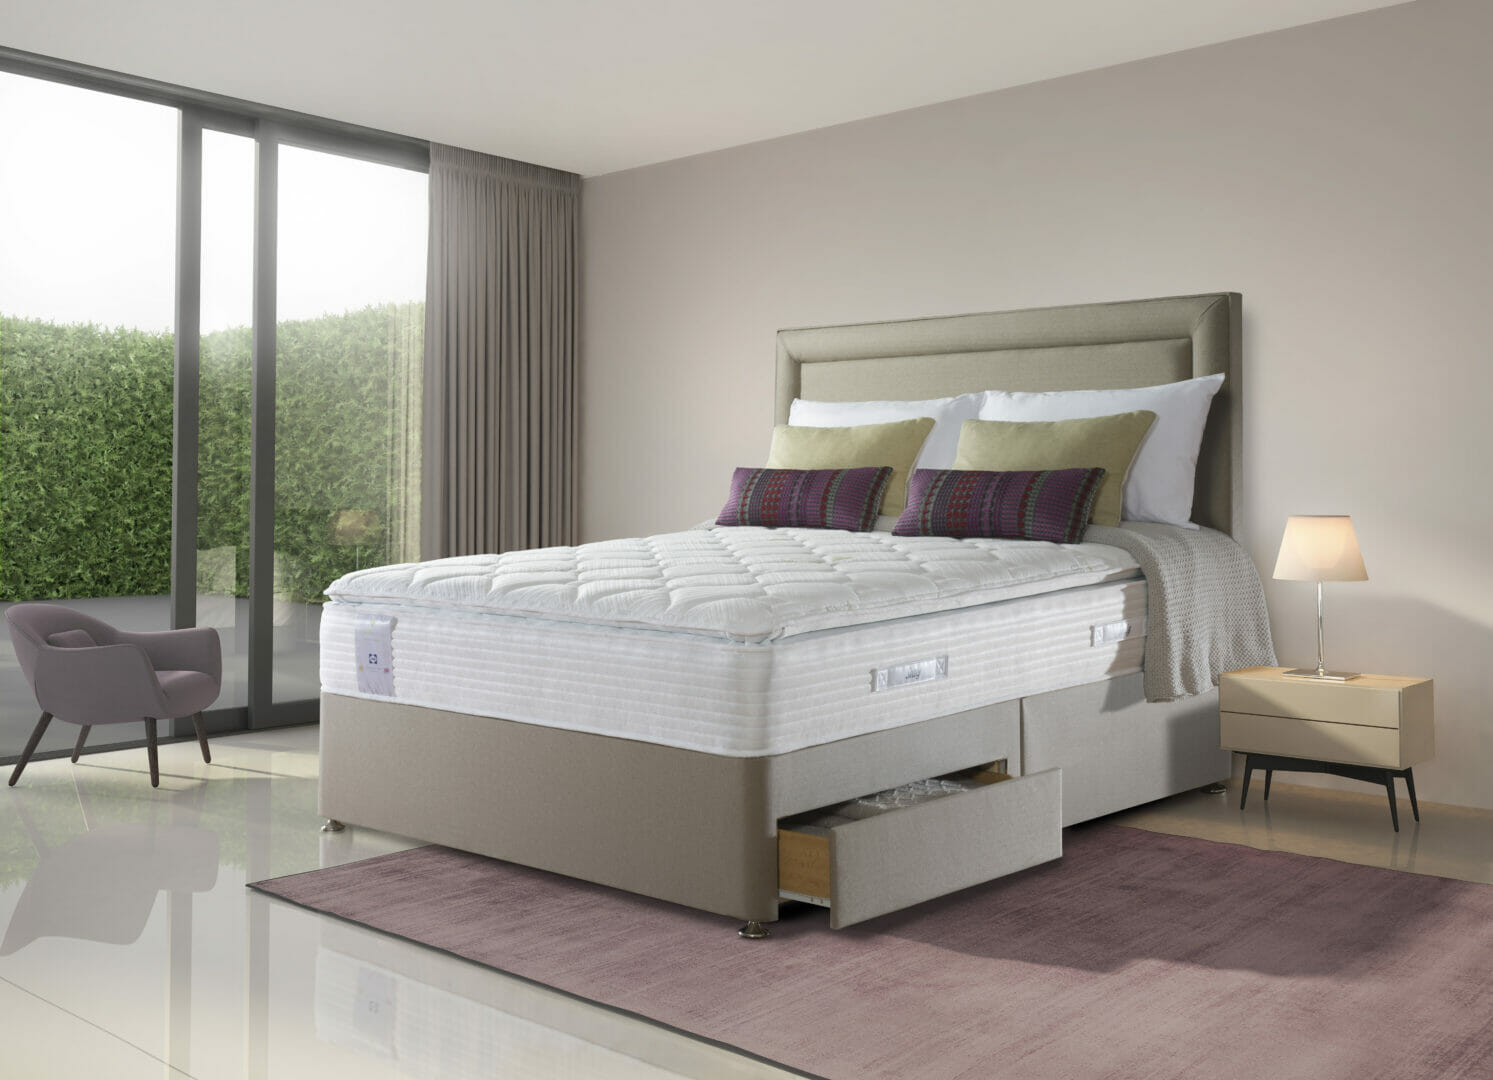 BEDS at January Furniture Show